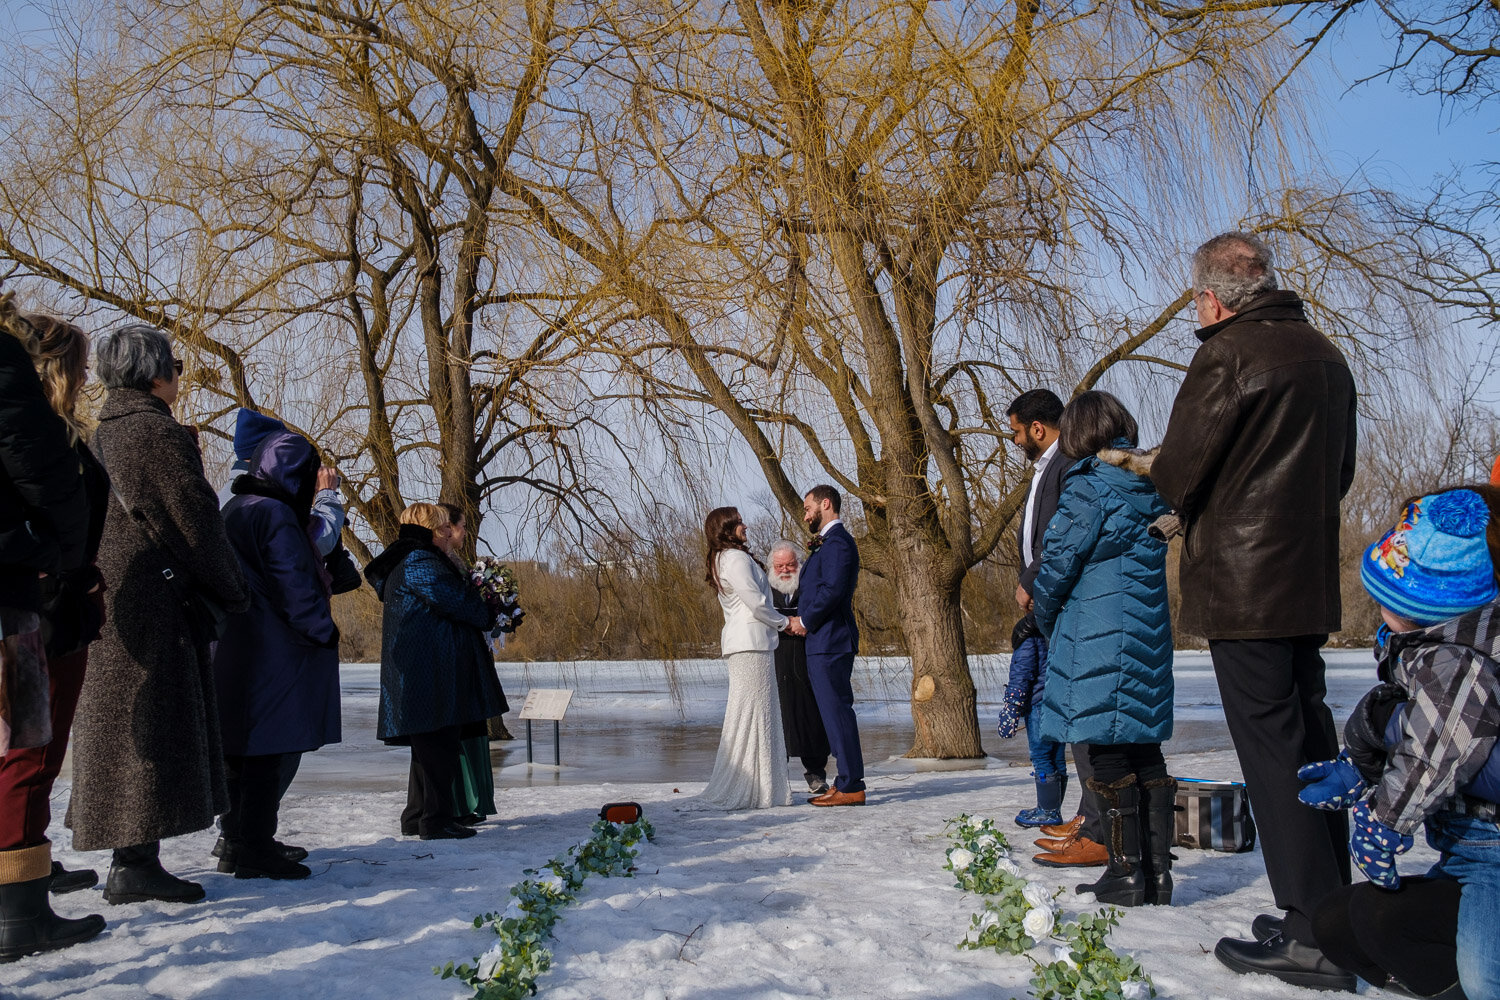 photograph at a winter wedding ceremony in ottawa